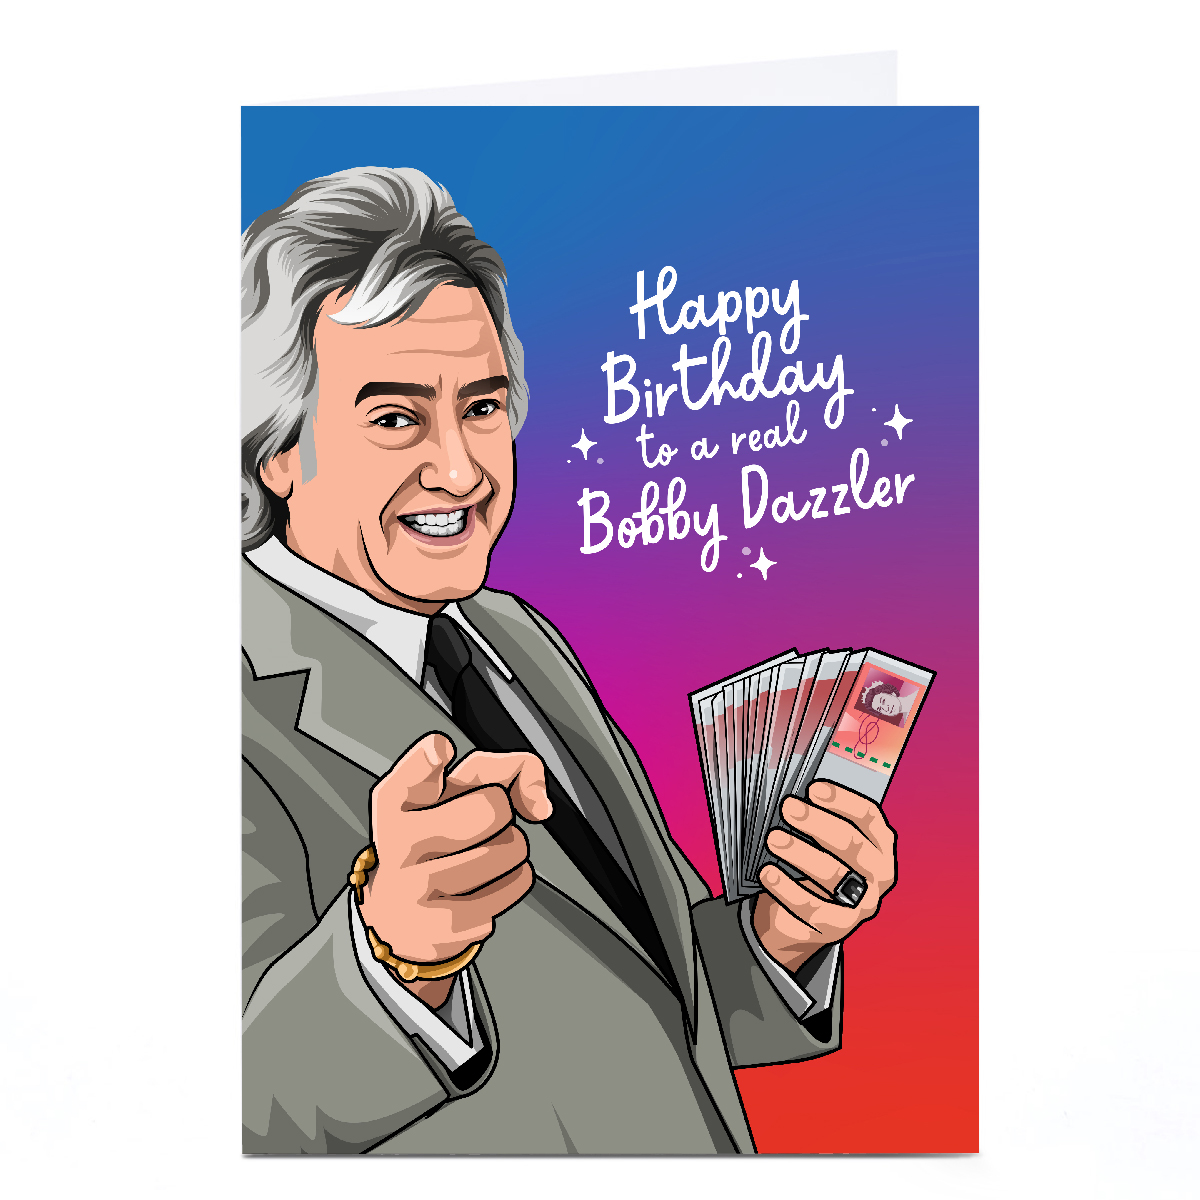 Personalised All Things Banter Birthday Card - Bobby Dazzler